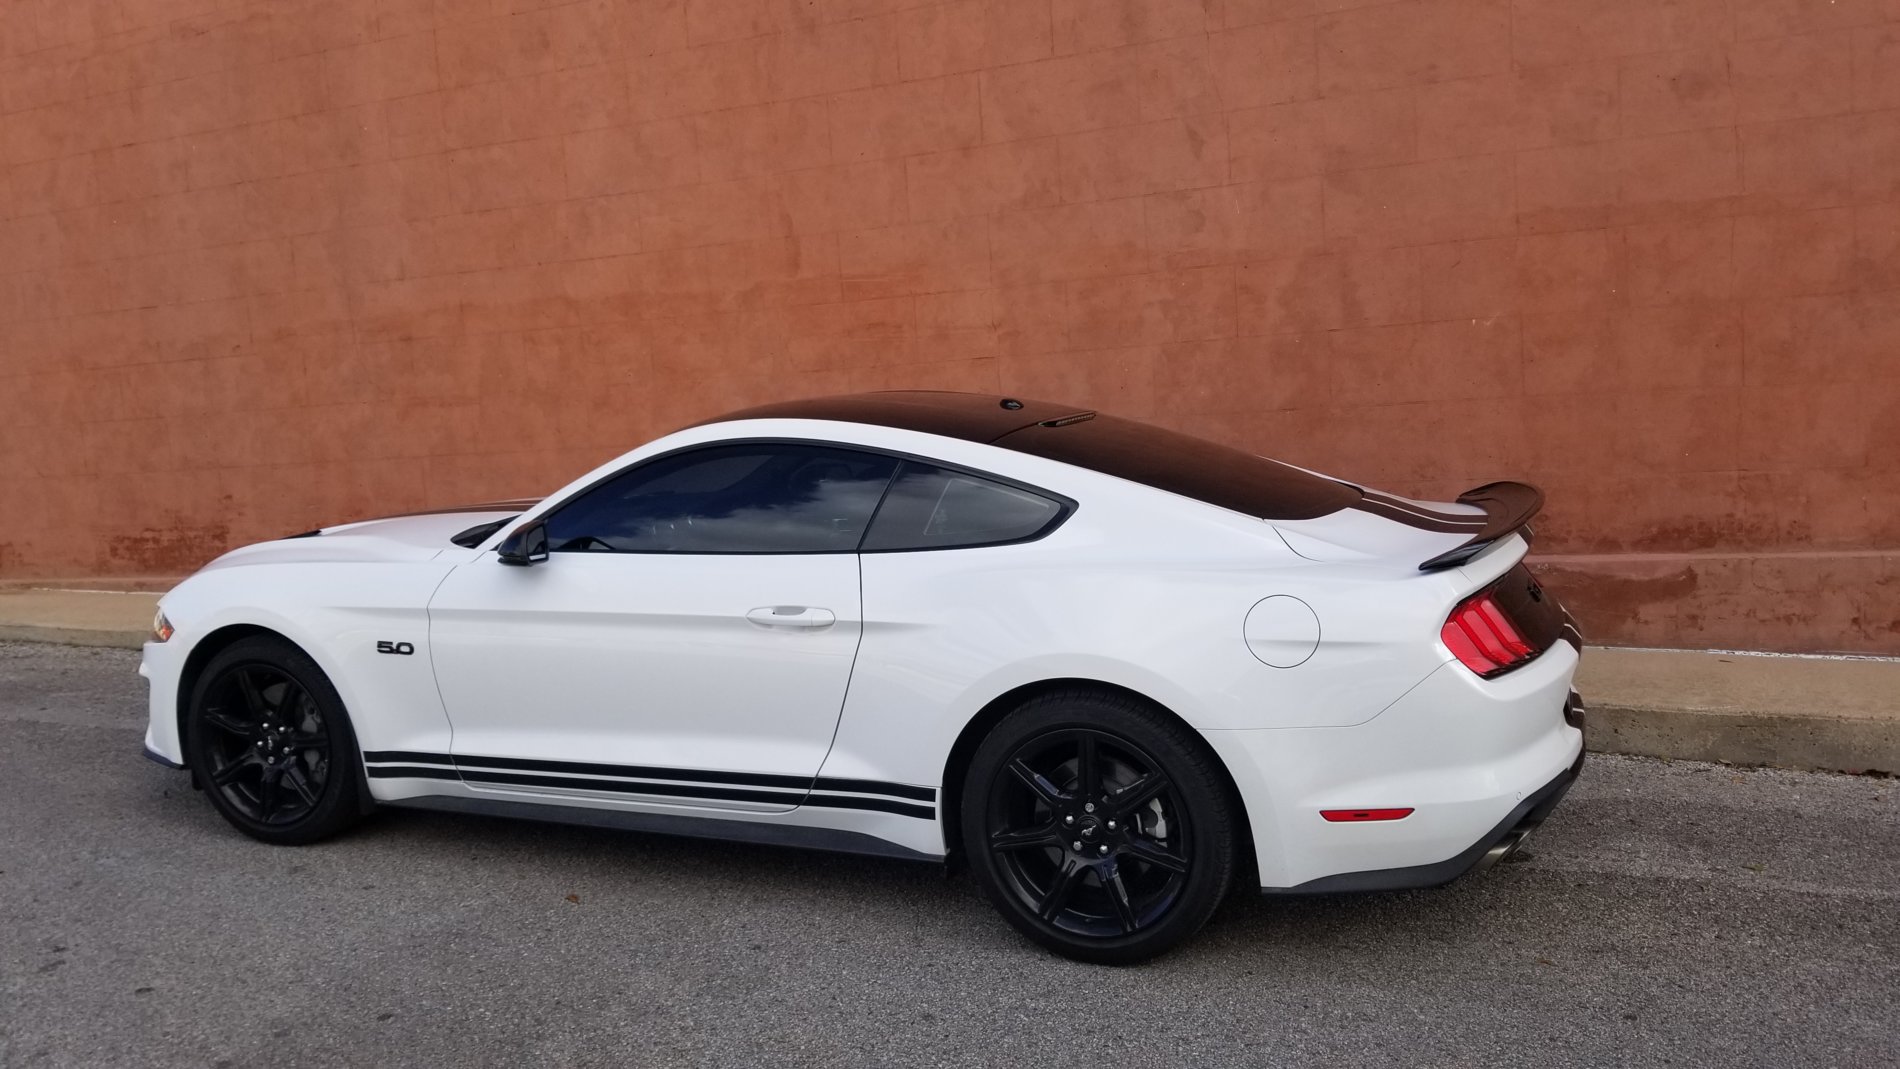 S650 Mustang Pic Test 20191215_114517